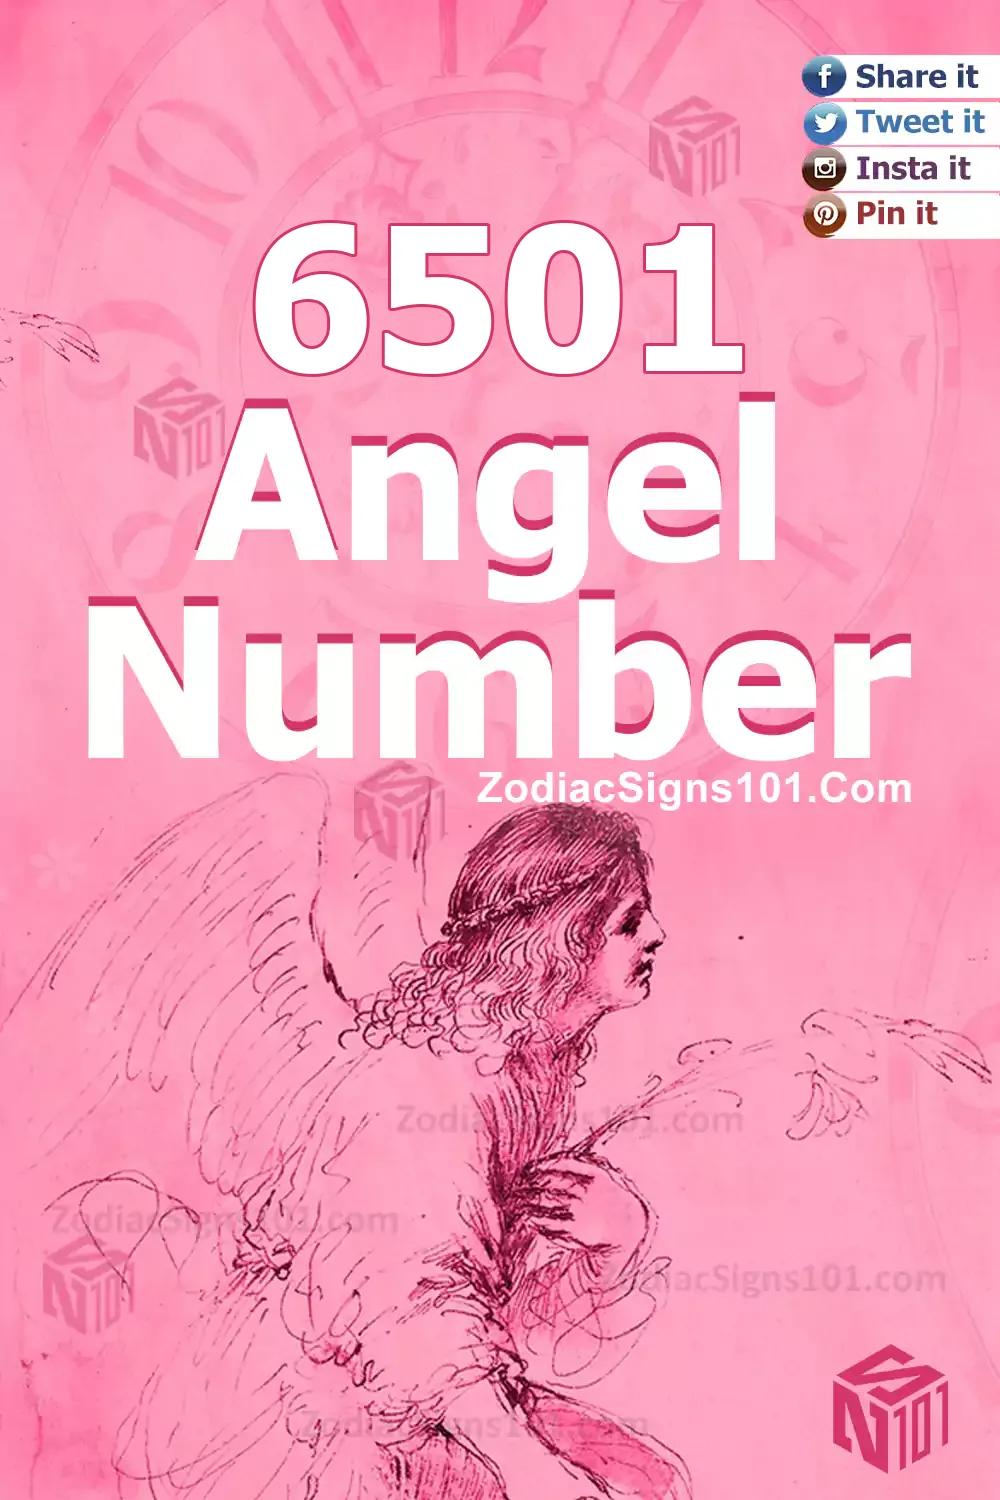 6501 Angel Number Meaning